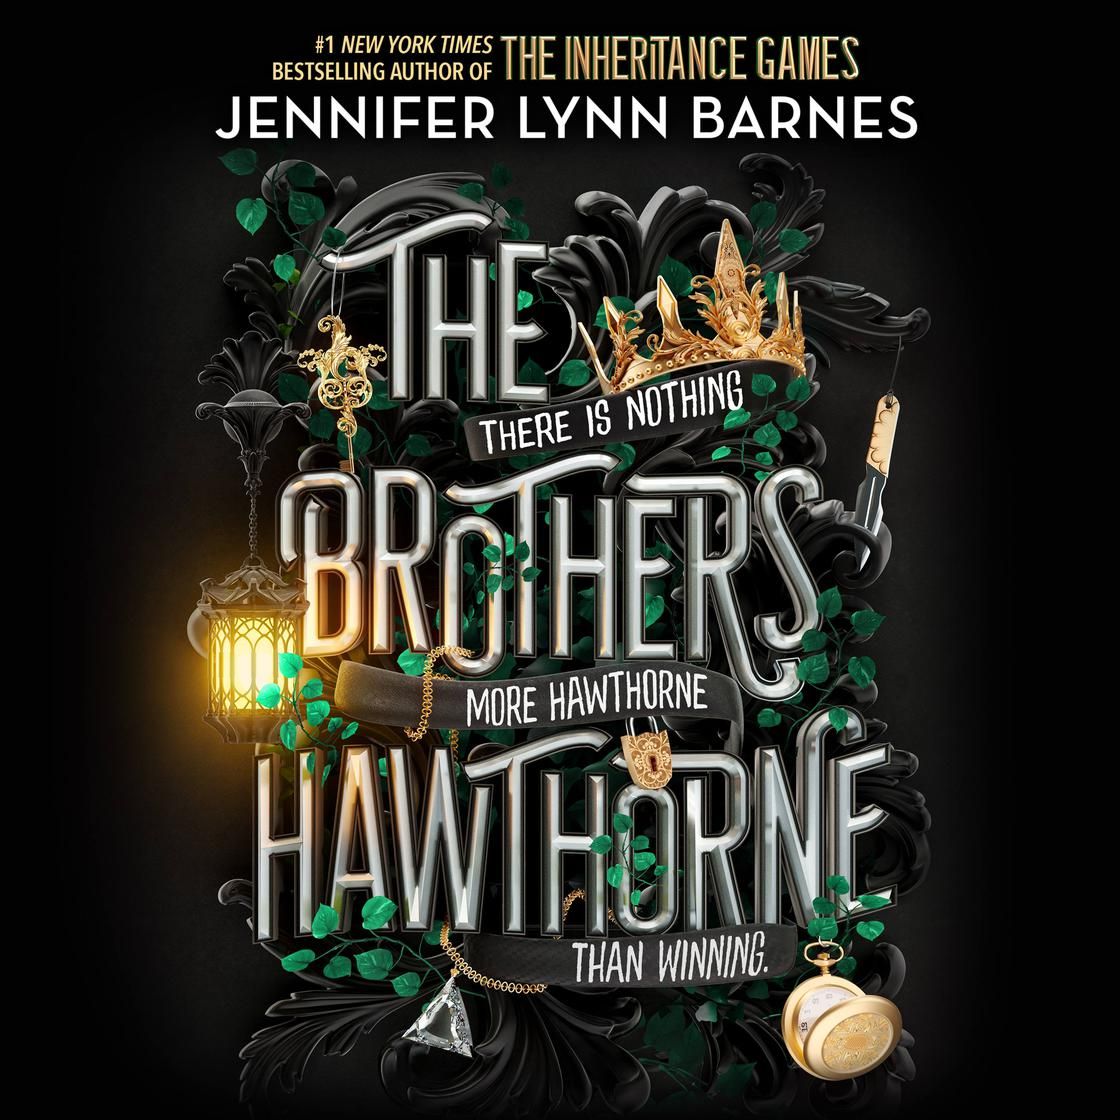 The Brothers Hawthorne
by Jennifer Lynn Barnes
$36.79

Get for $14.99 with membership
  Add to cart
 | Libro.fm (US)